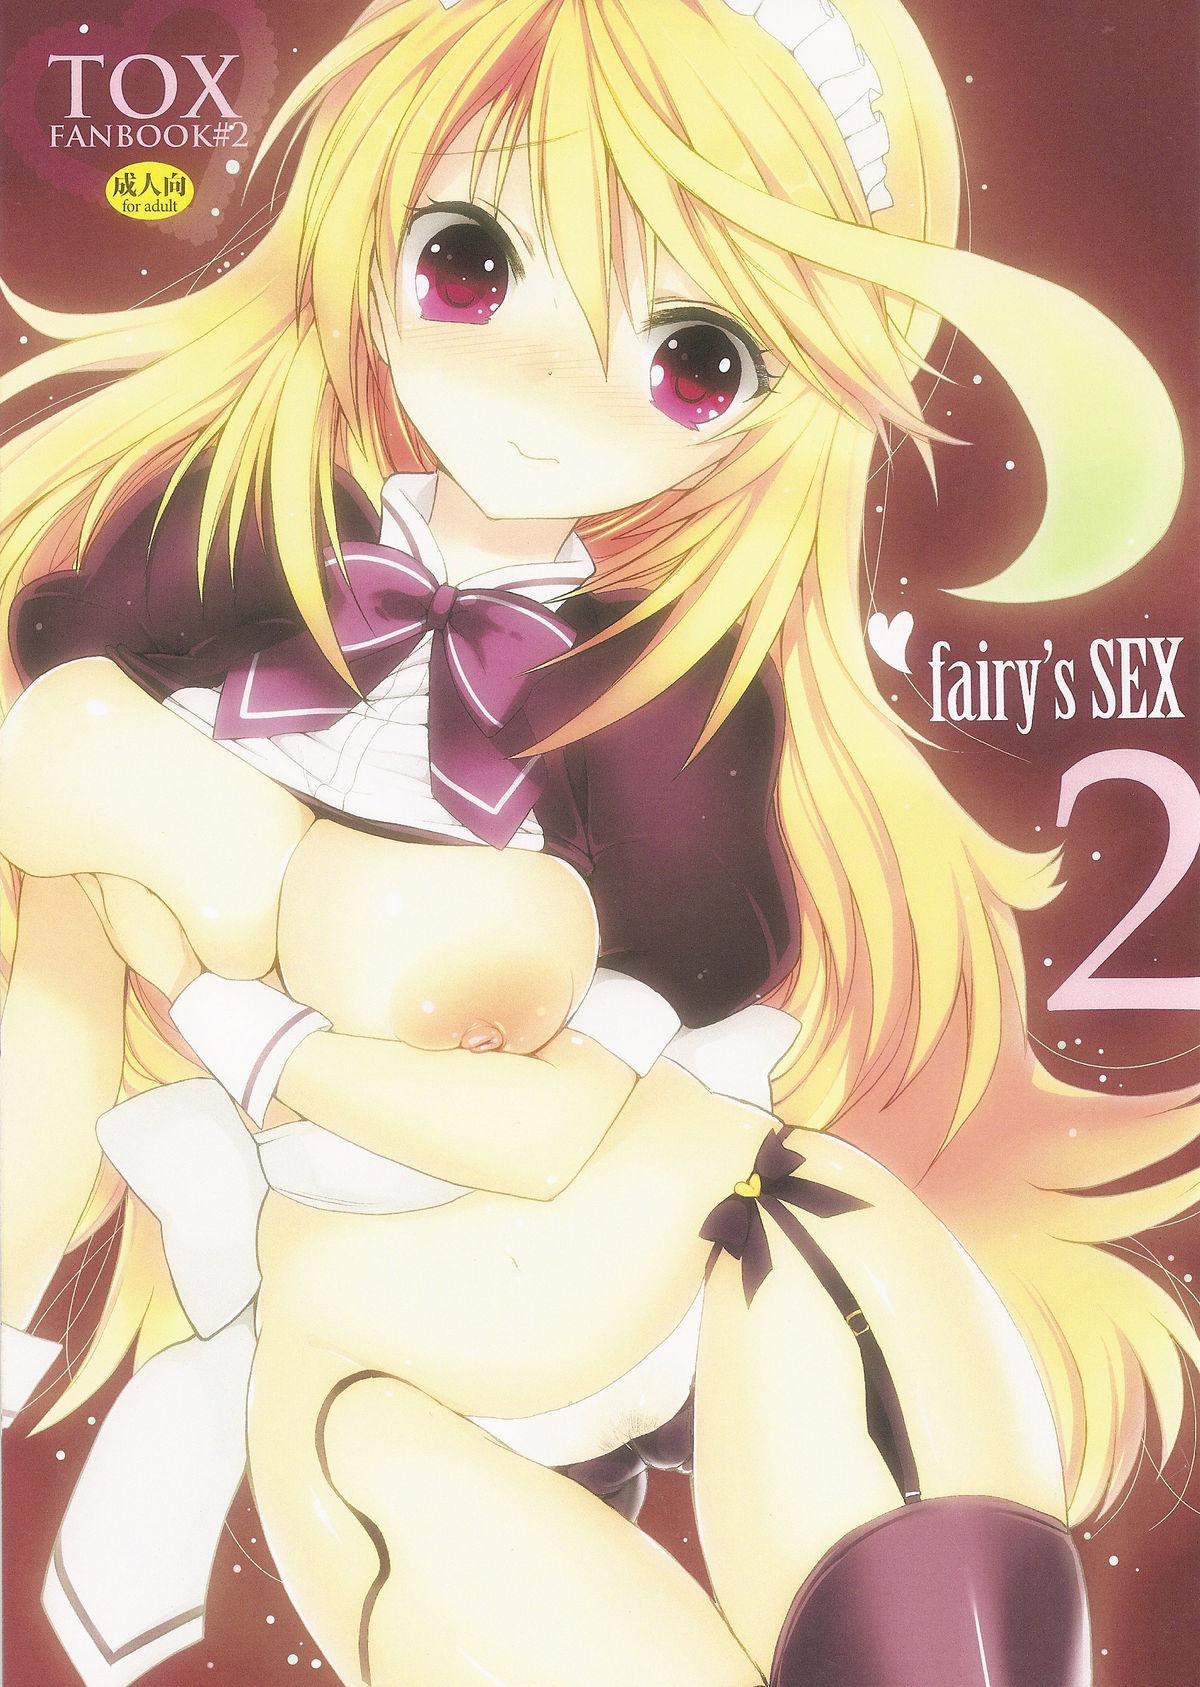 Tight fairy's SEX 2 - Tales of xillia Holes - Picture 1